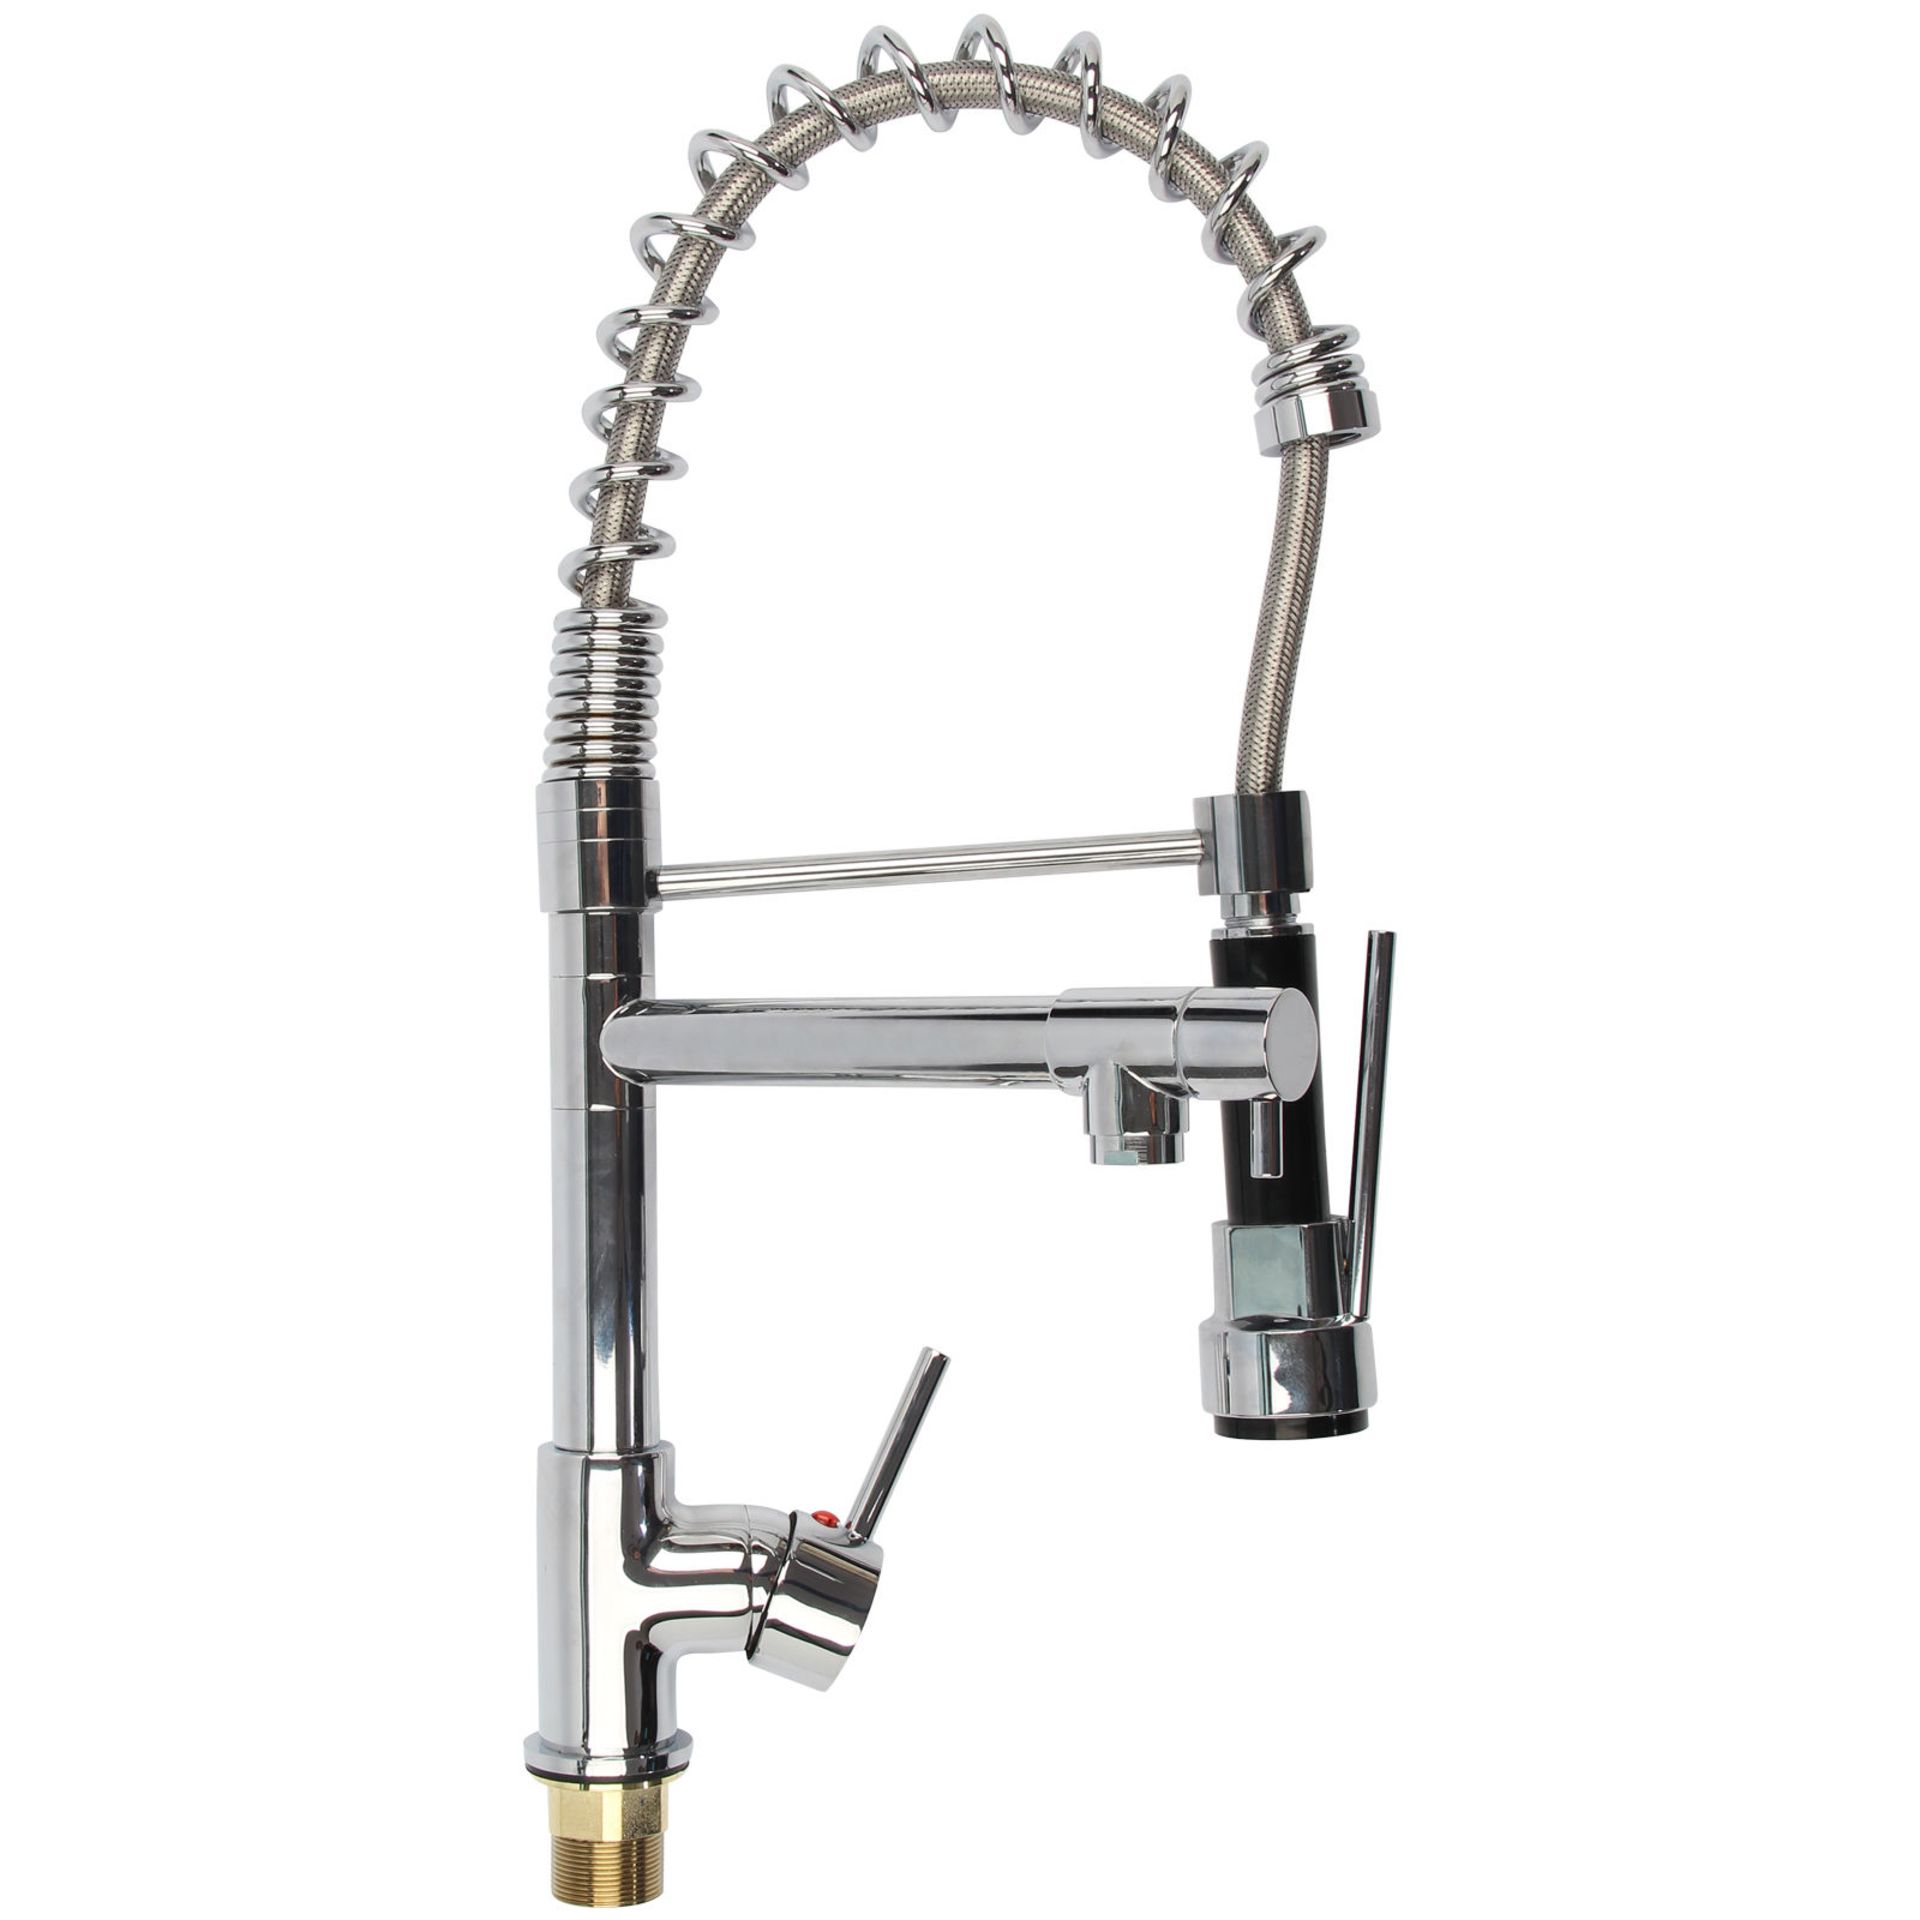 (GR17) Bentley Modern Monobloc Chrome Brass Pull Out Spray Mixer Tap. RRP £349.99. This tap is - Image 4 of 4